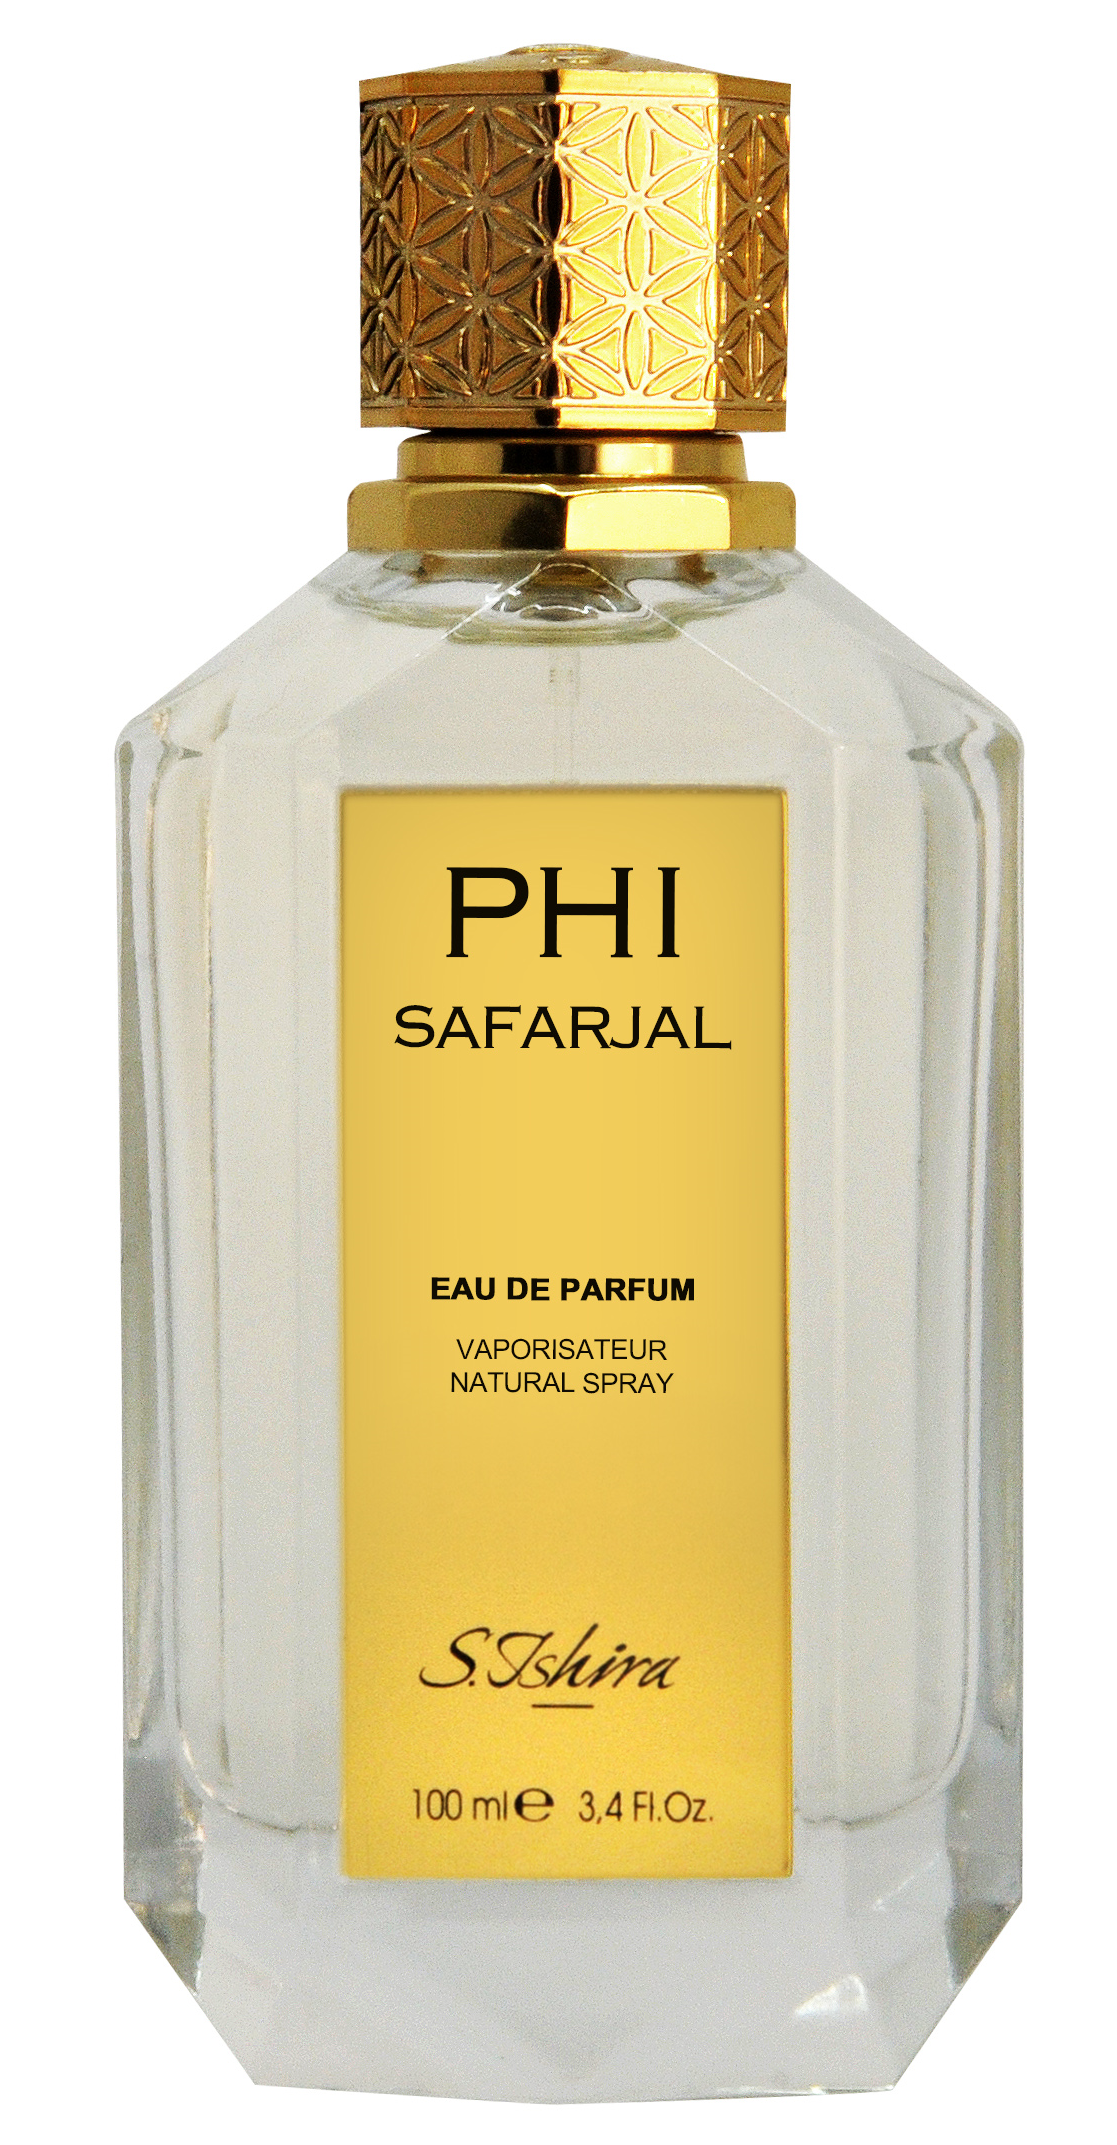 Safarjal S.Ishira perfume - a new fragrance for women and men 2016